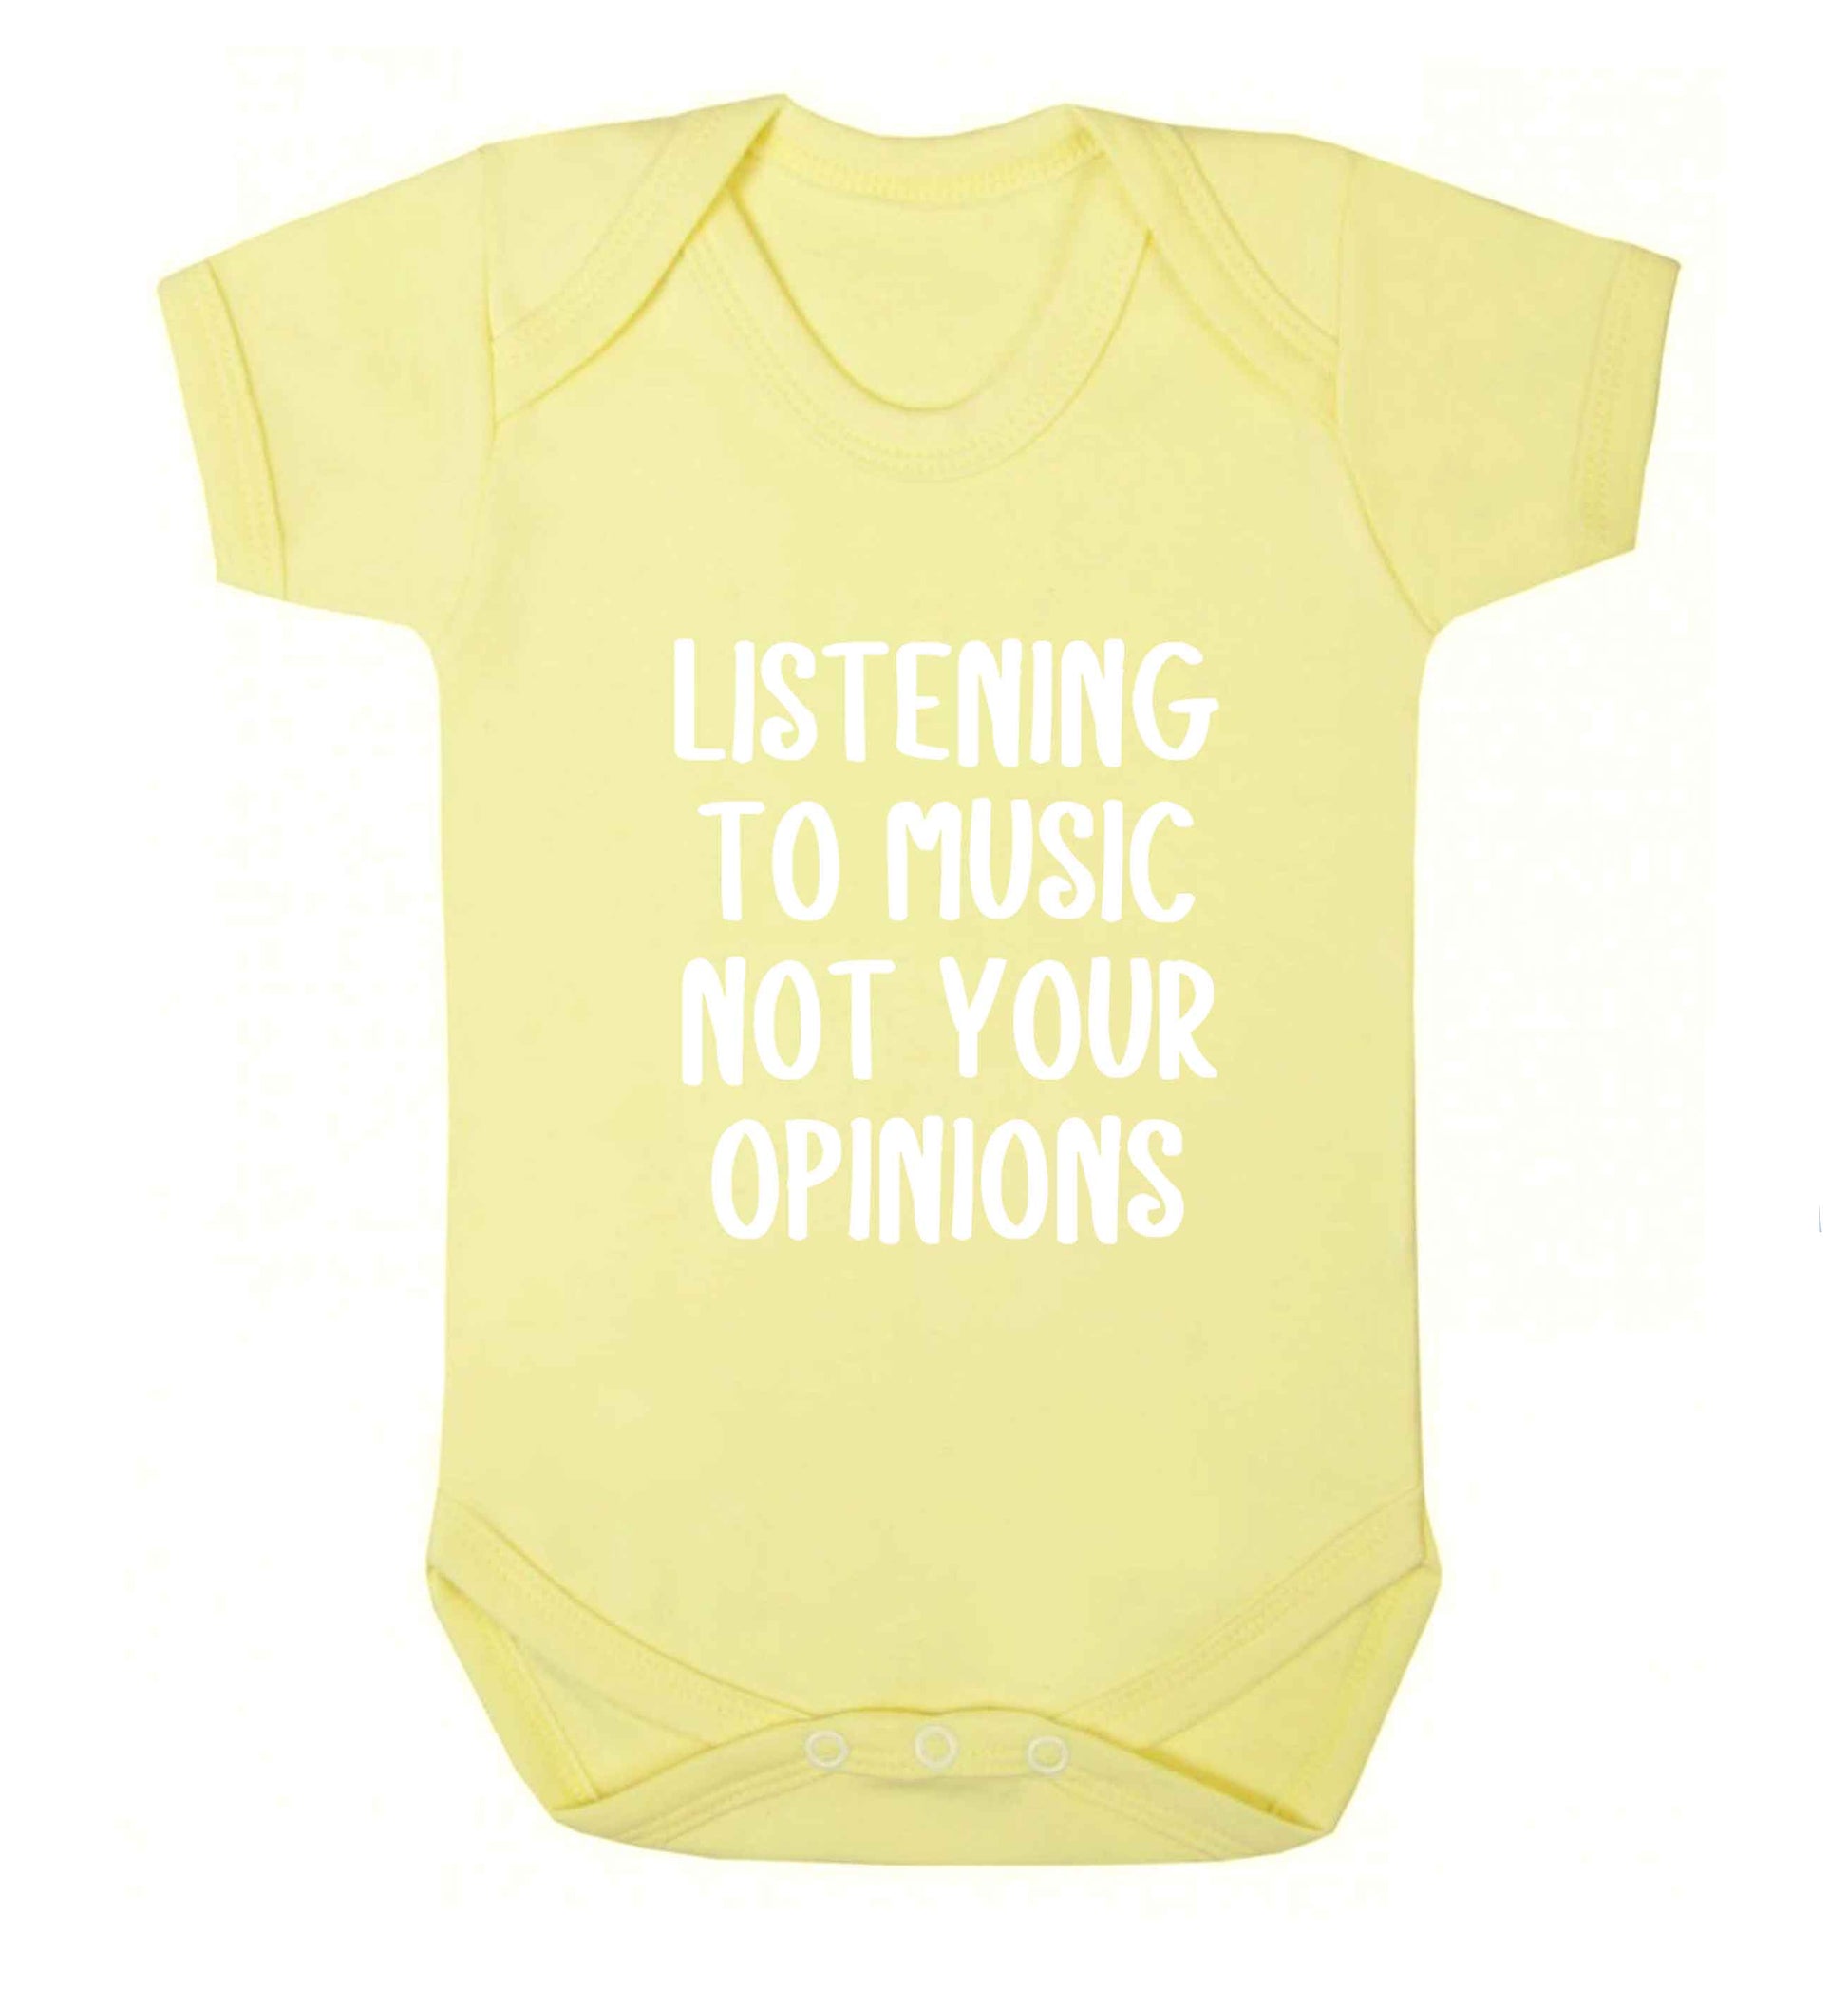 Listening to music not your opinions baby vest pale yellow 18-24 months